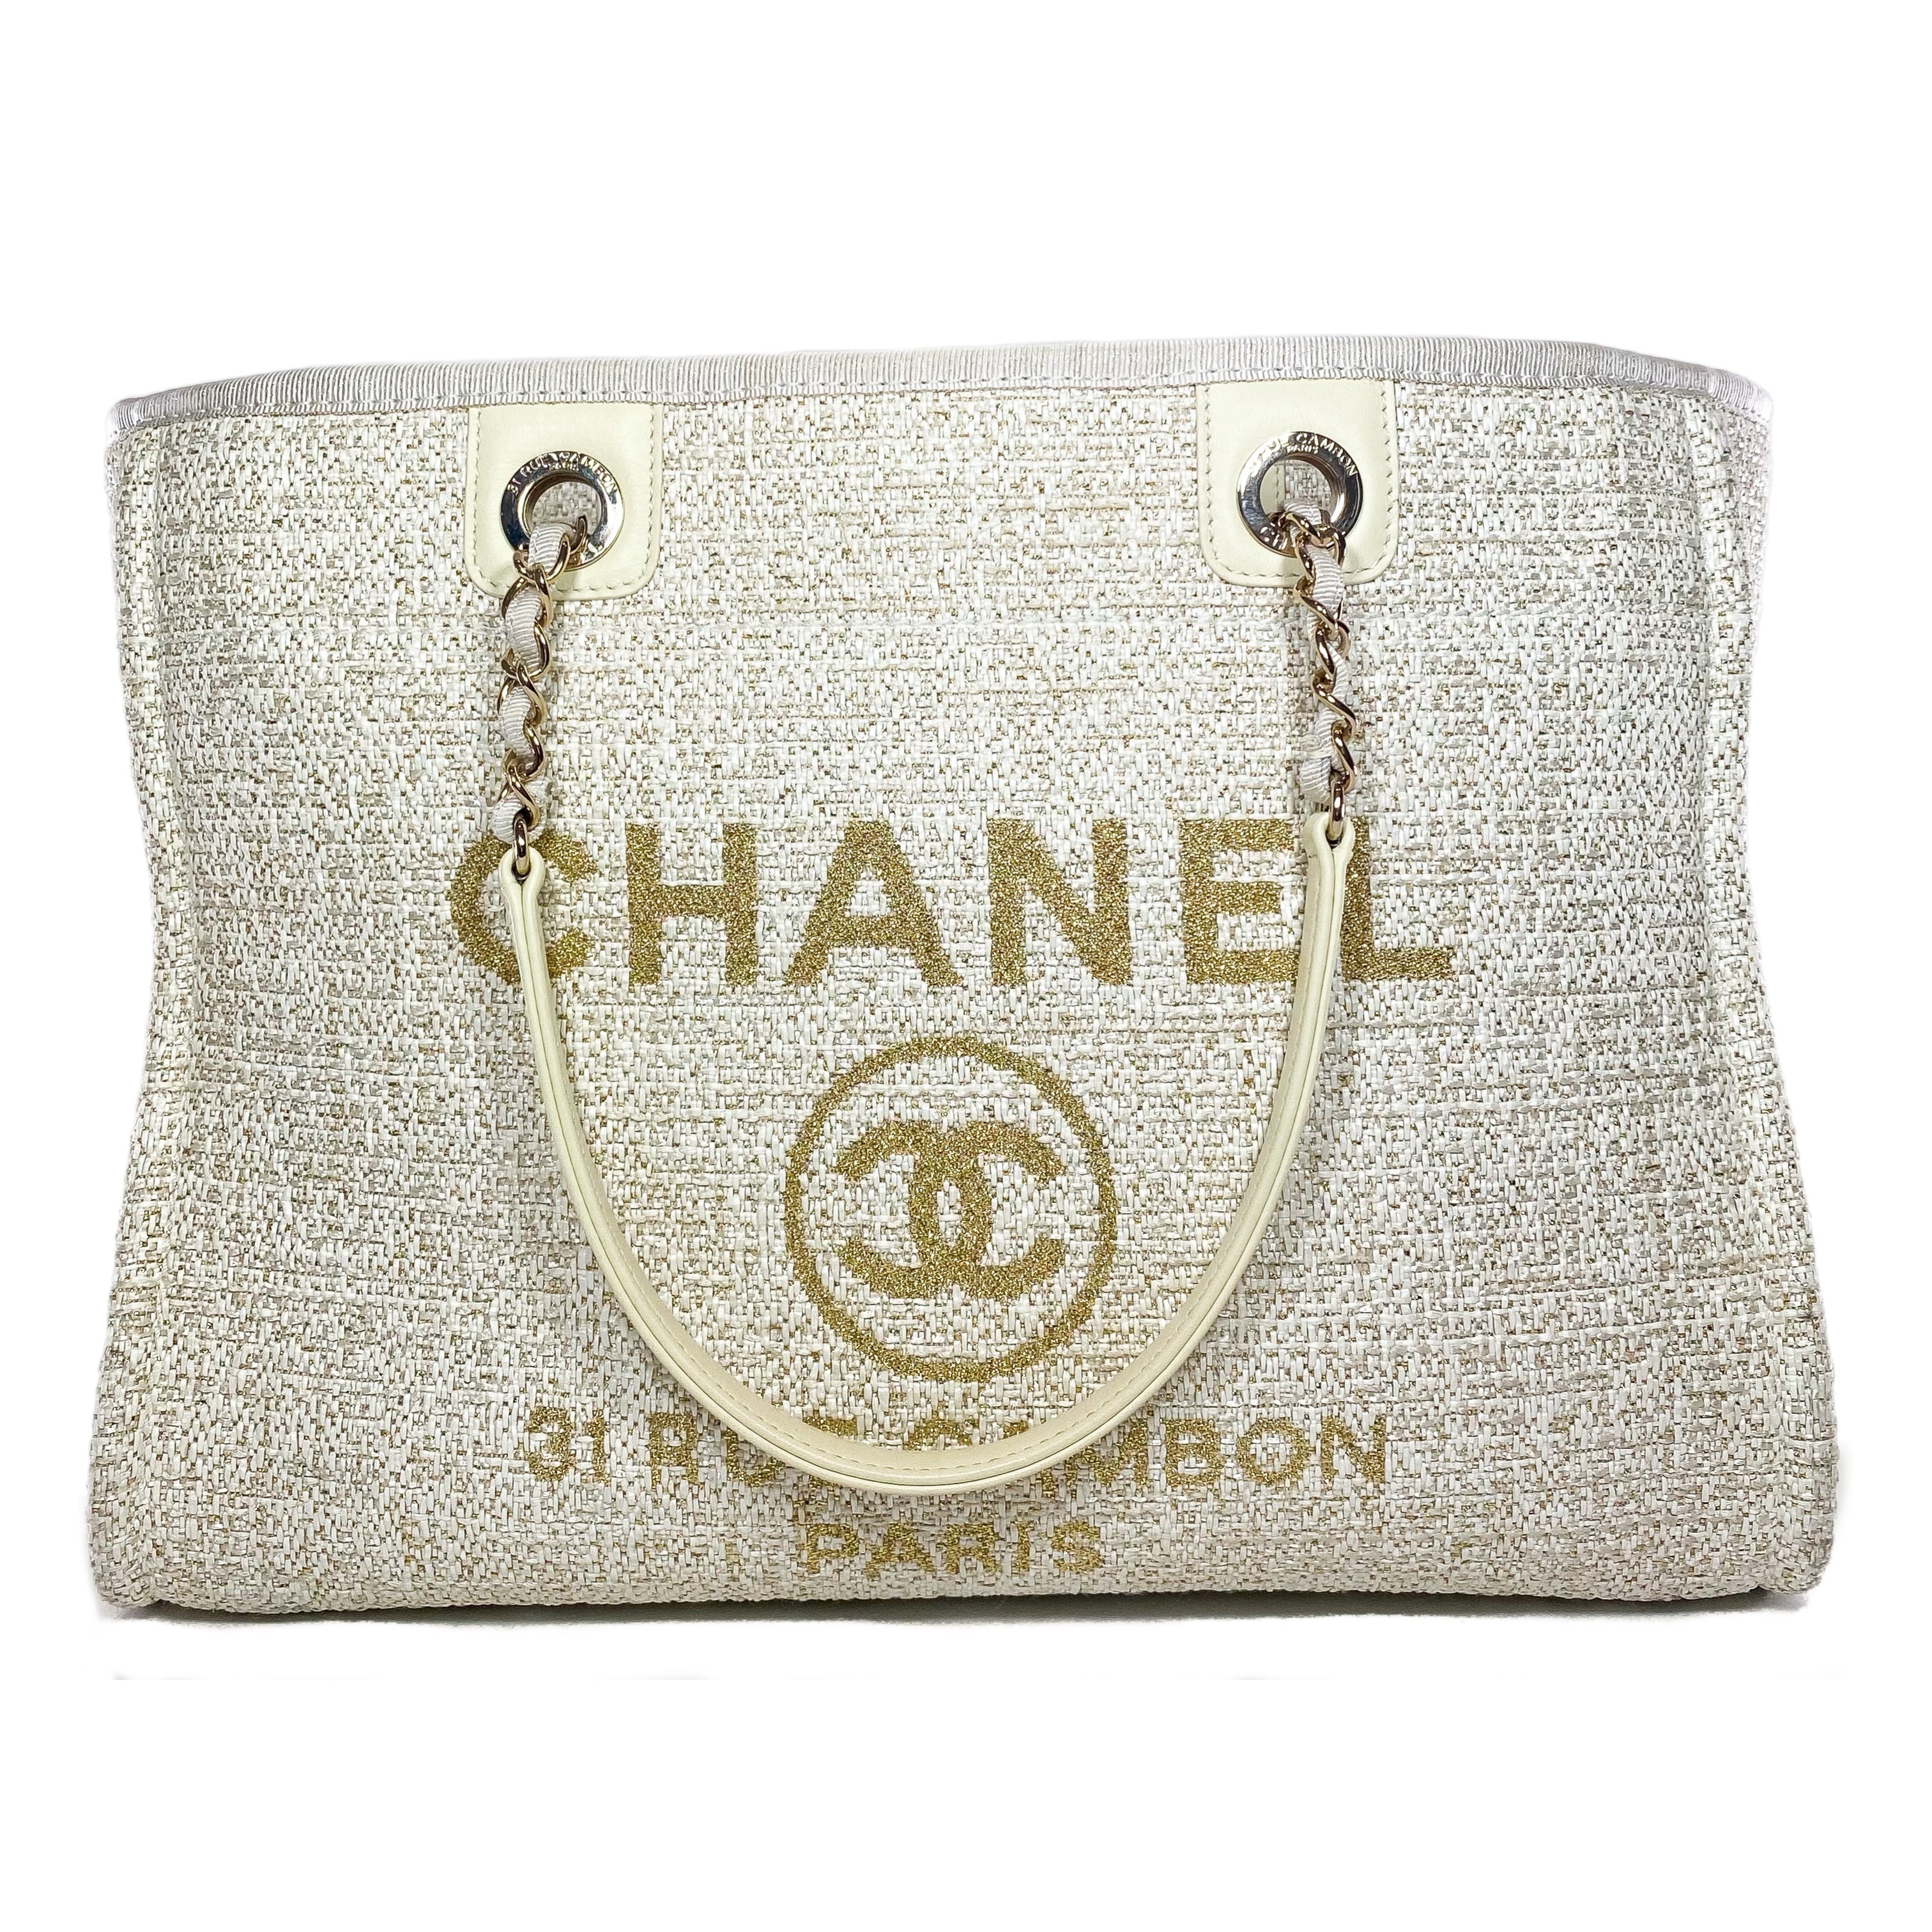 Chanel Large Ivory Deauville